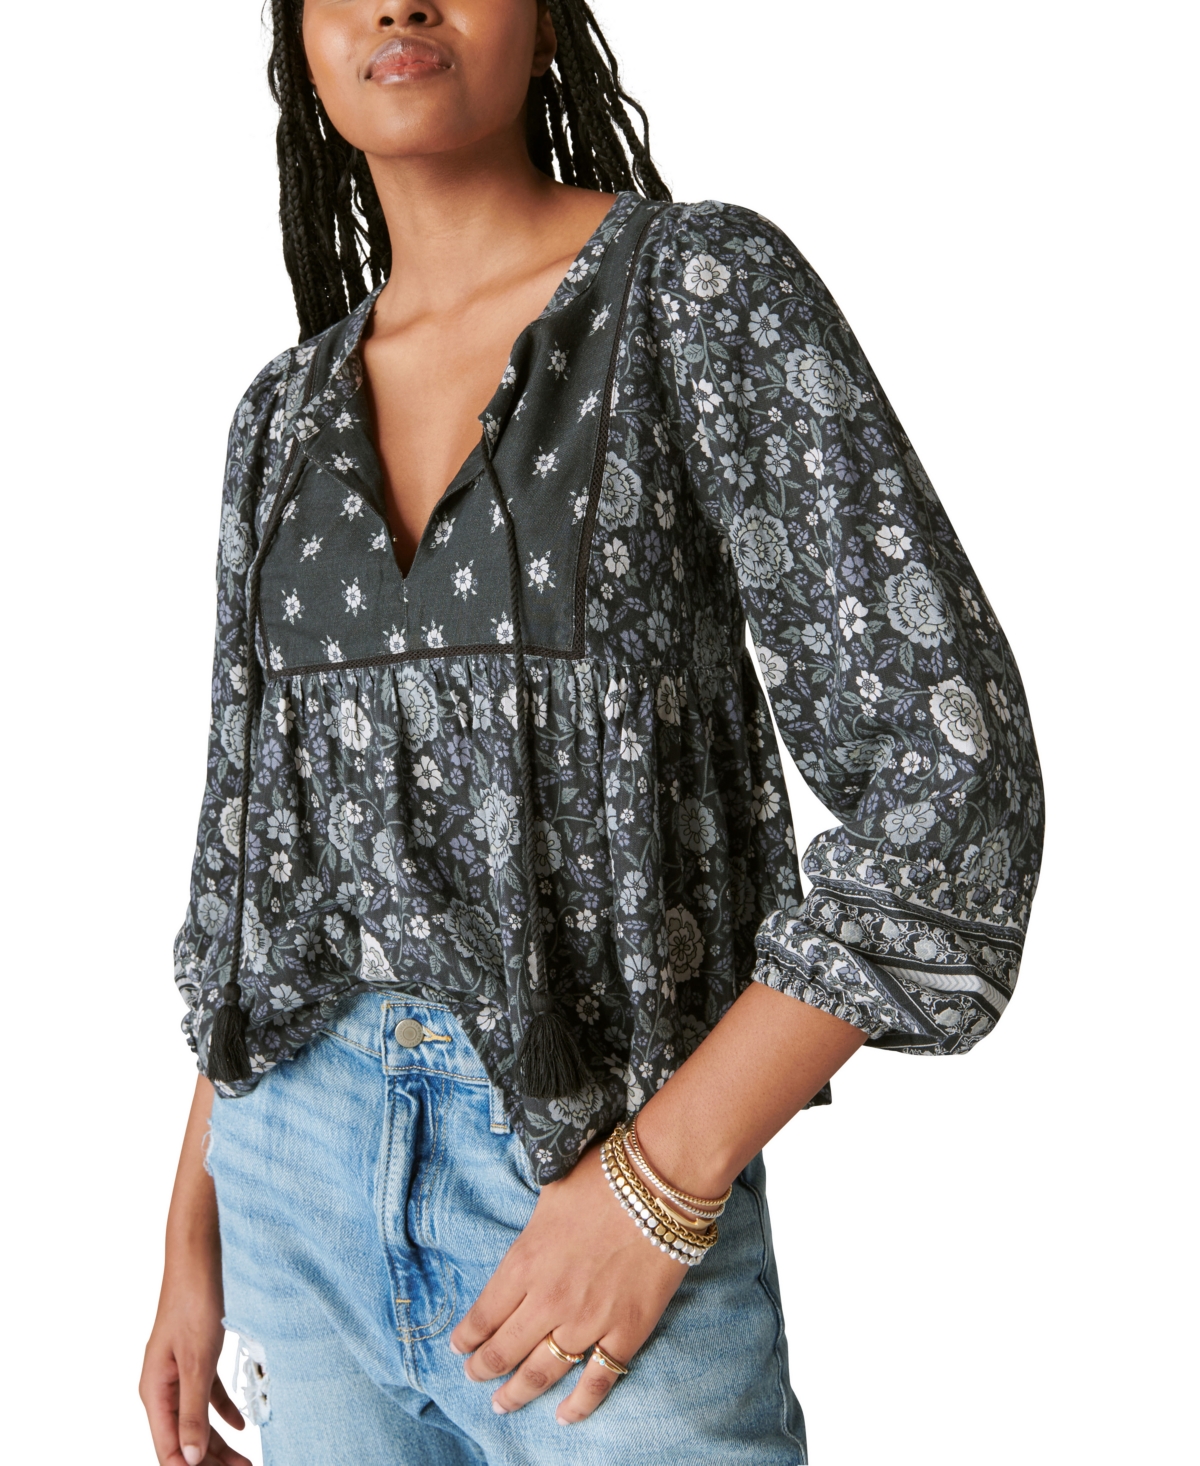 LUCKY BRAND WOMEN'S LONG SLEEVE PEASANT BLOUSE